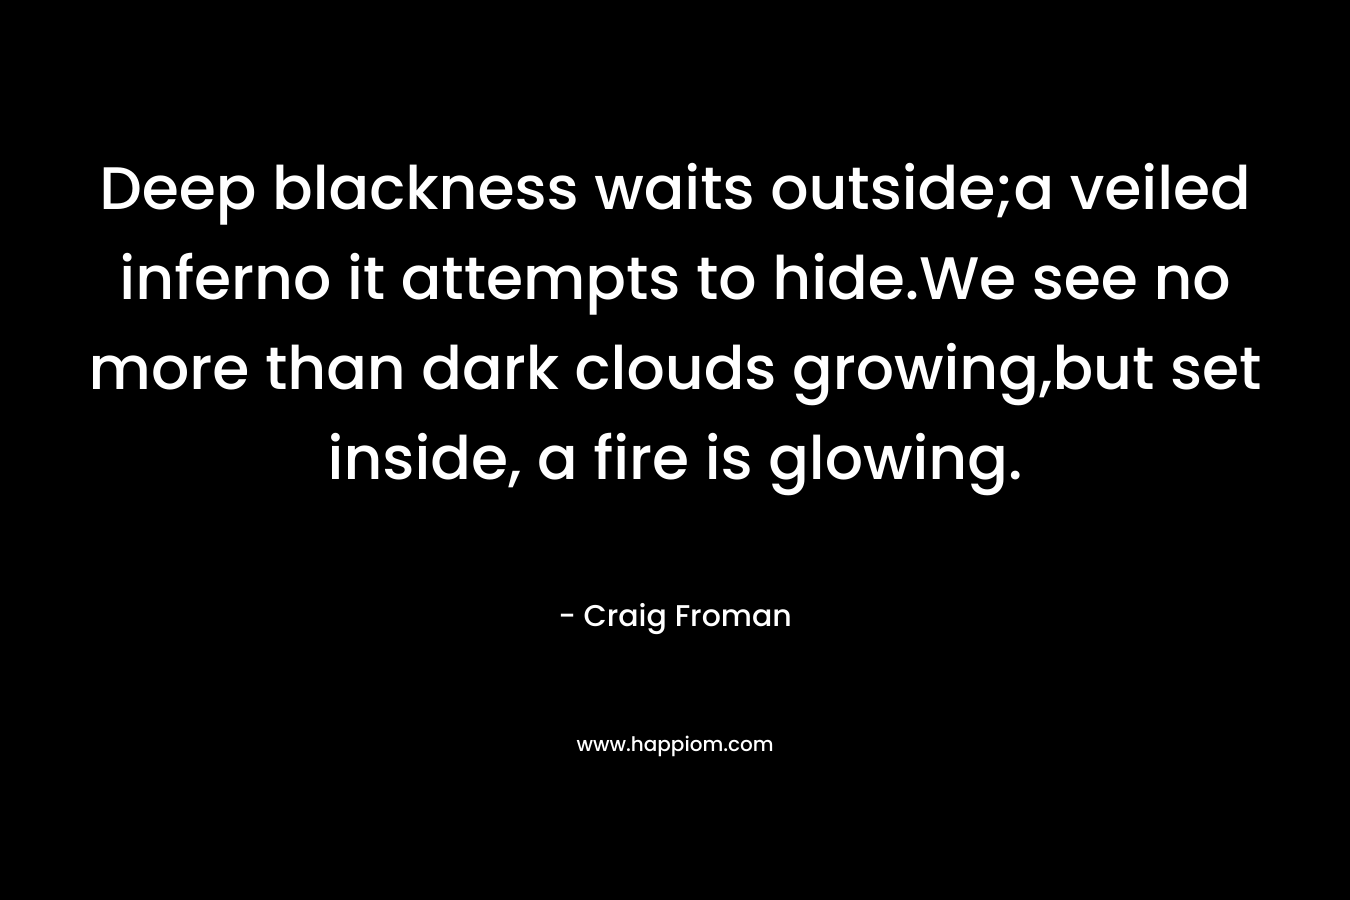 Deep blackness waits outside;a veiled inferno it attempts to hide.We see no more than dark clouds growing,but set inside, a fire is glowing. – Craig Froman